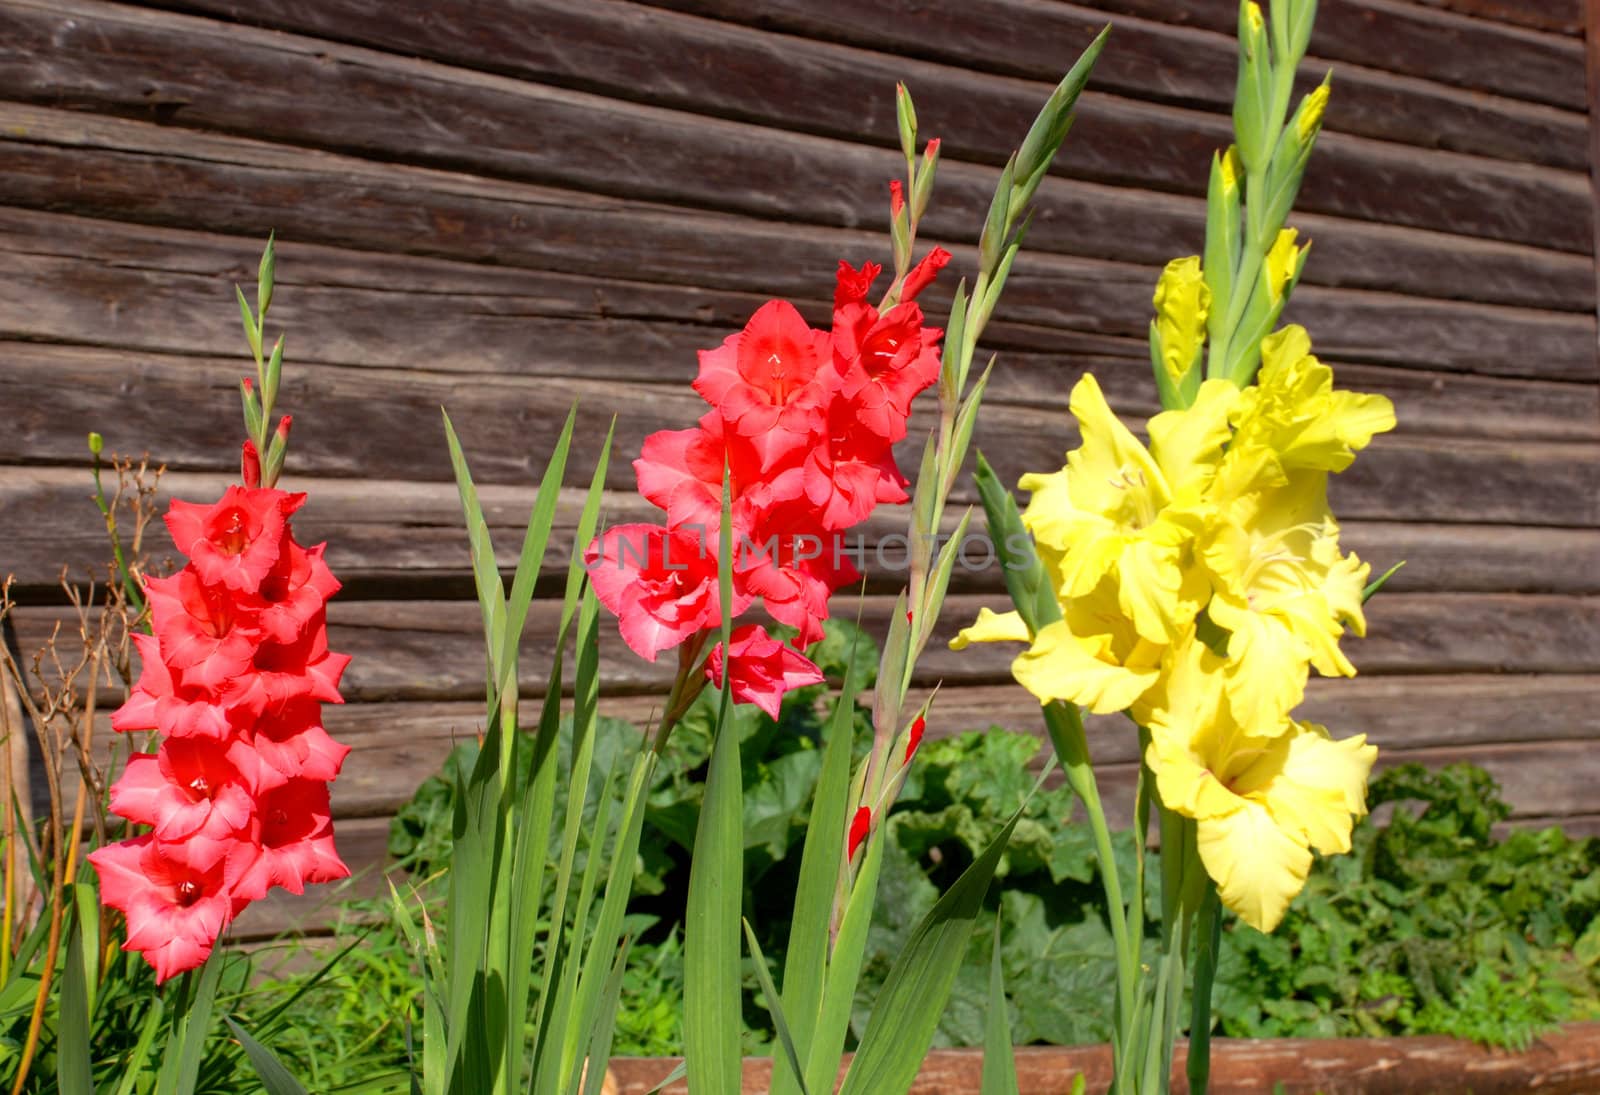 Multicolored gladioli - the traditional old village flower